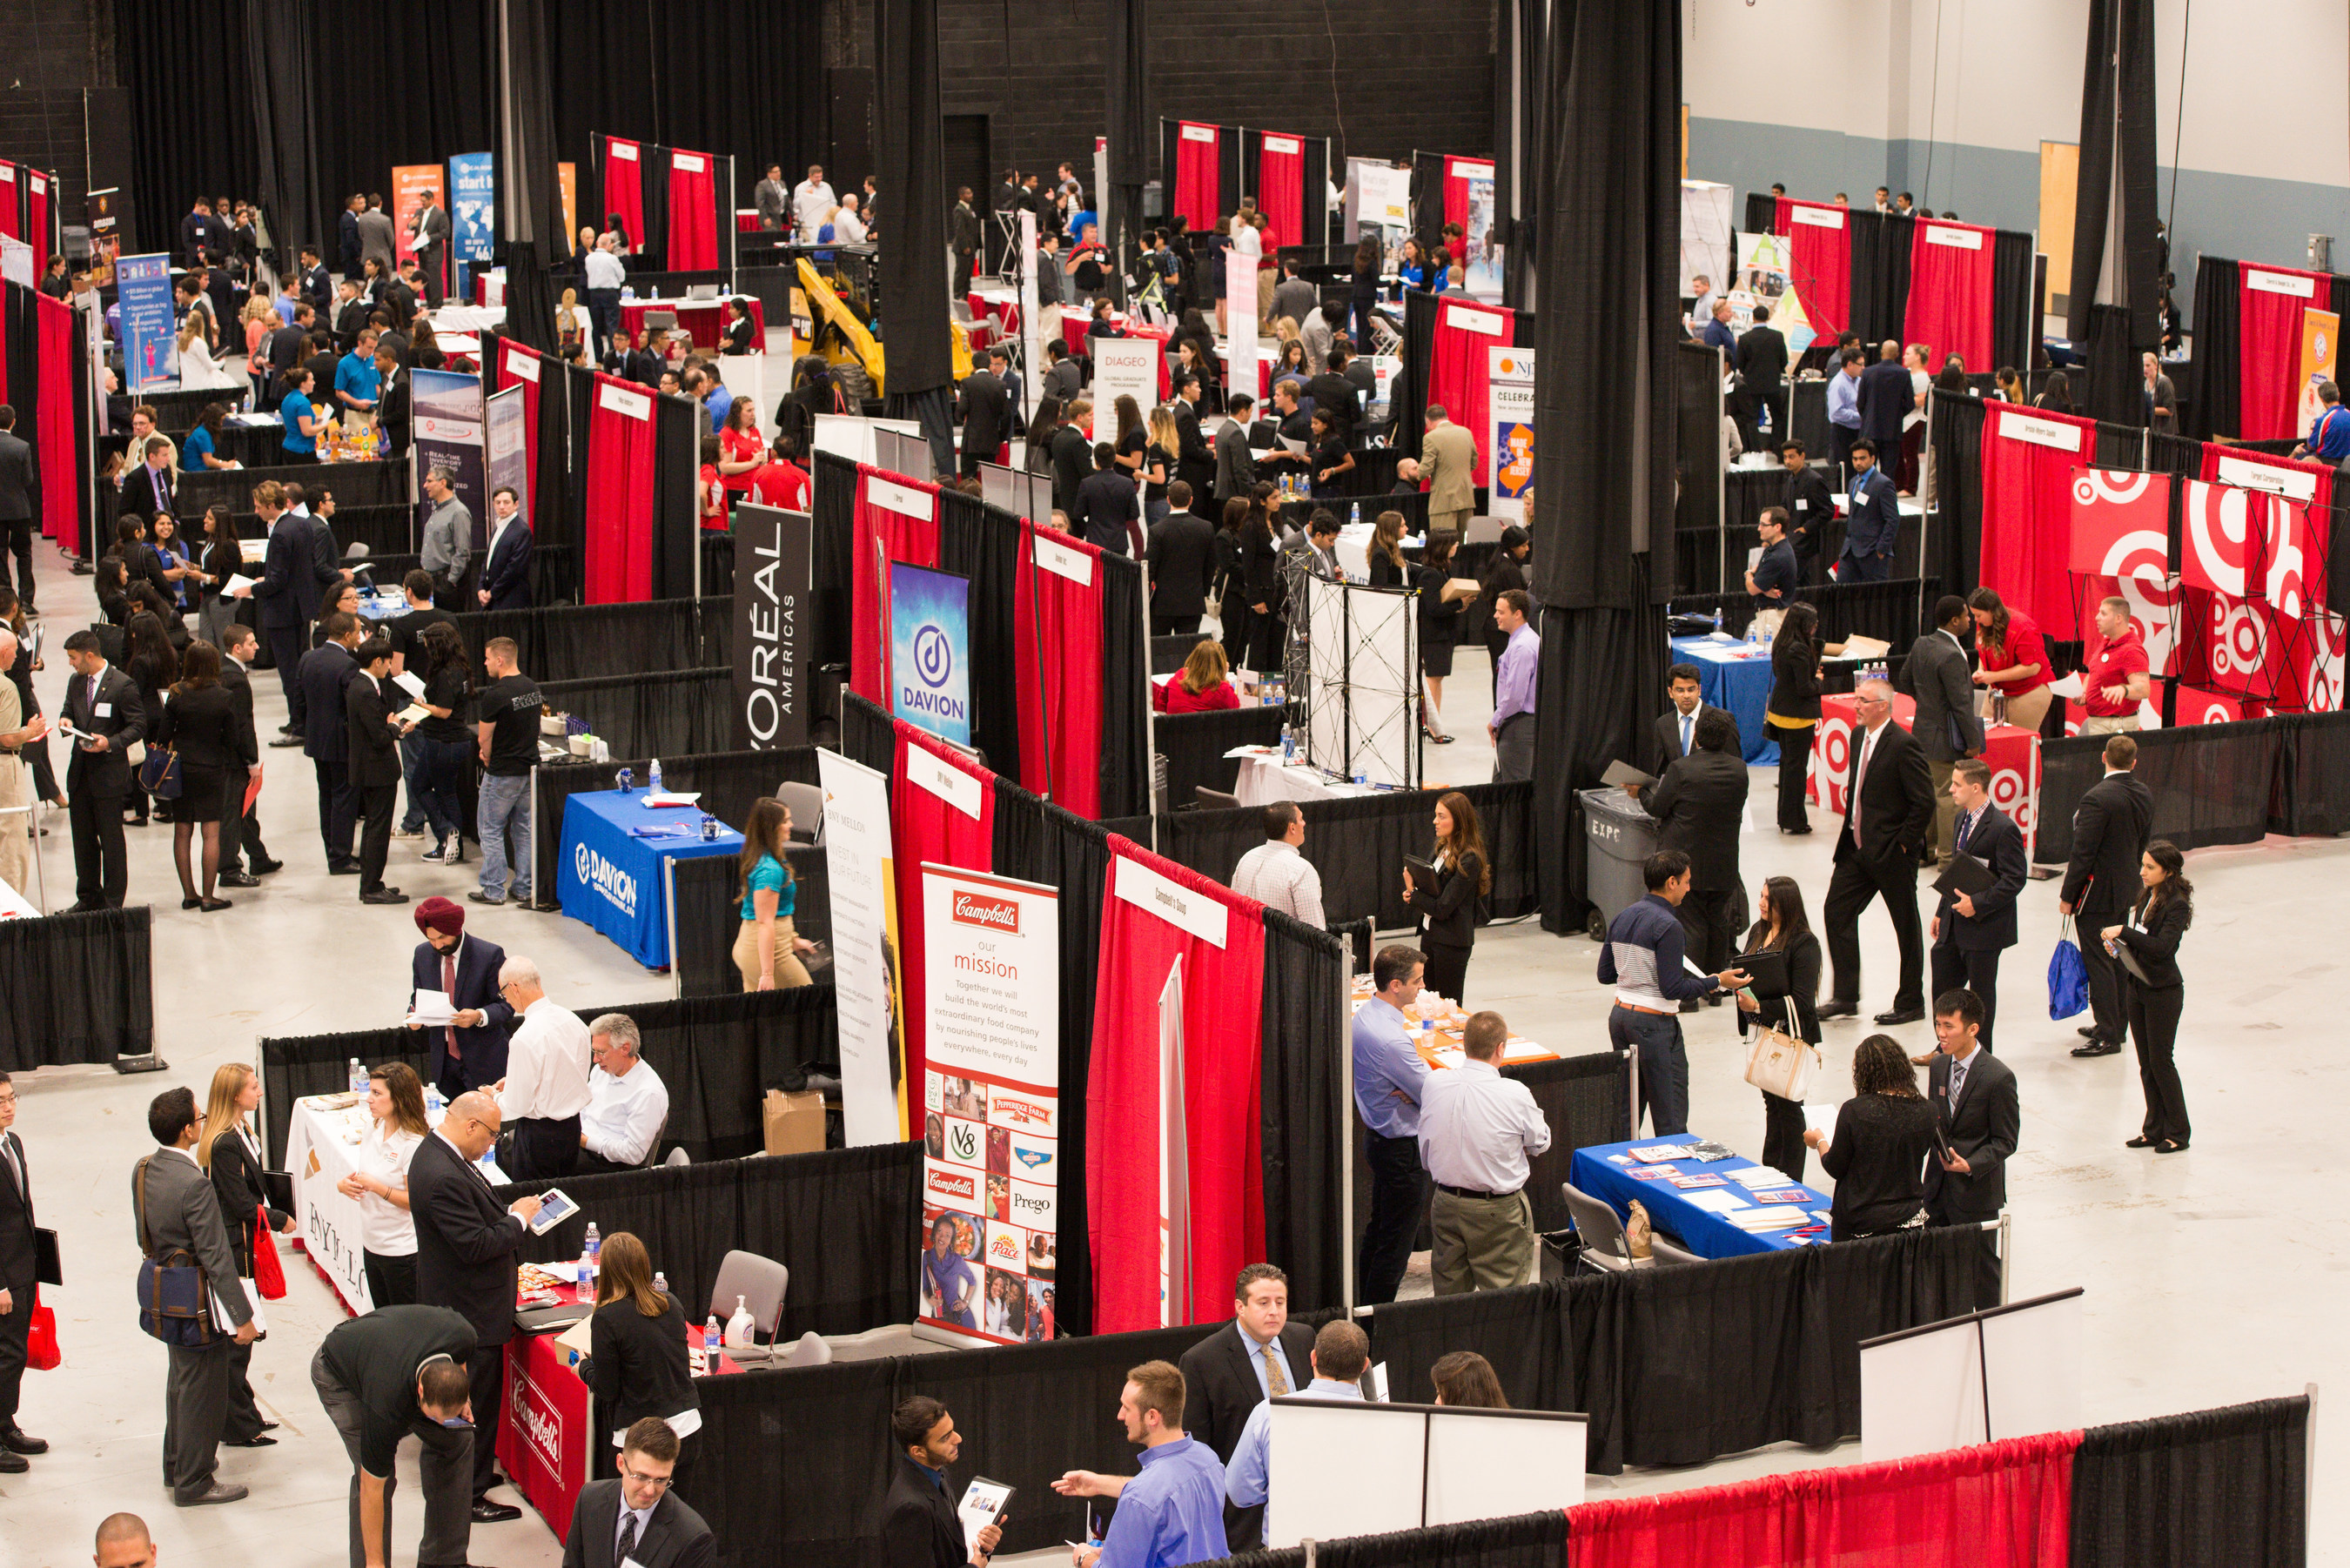 The 2015 Supply Chain Management Career Exposition at Rutgers Business School attracted 800 students and 85 companies.